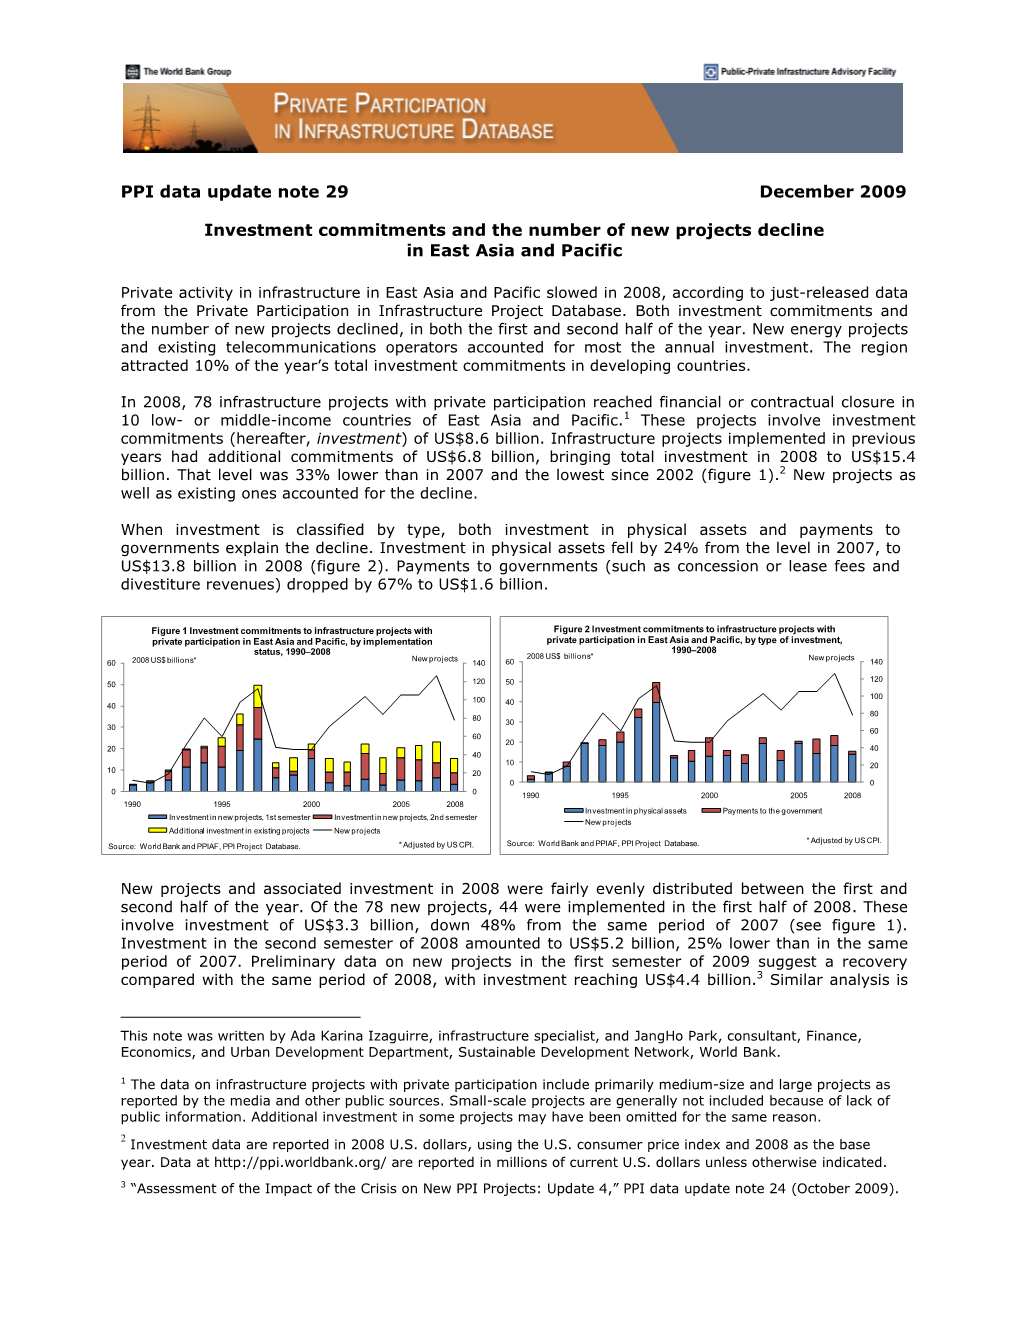 PPI Data Update Note 29 December 2009 Investment Commitments And